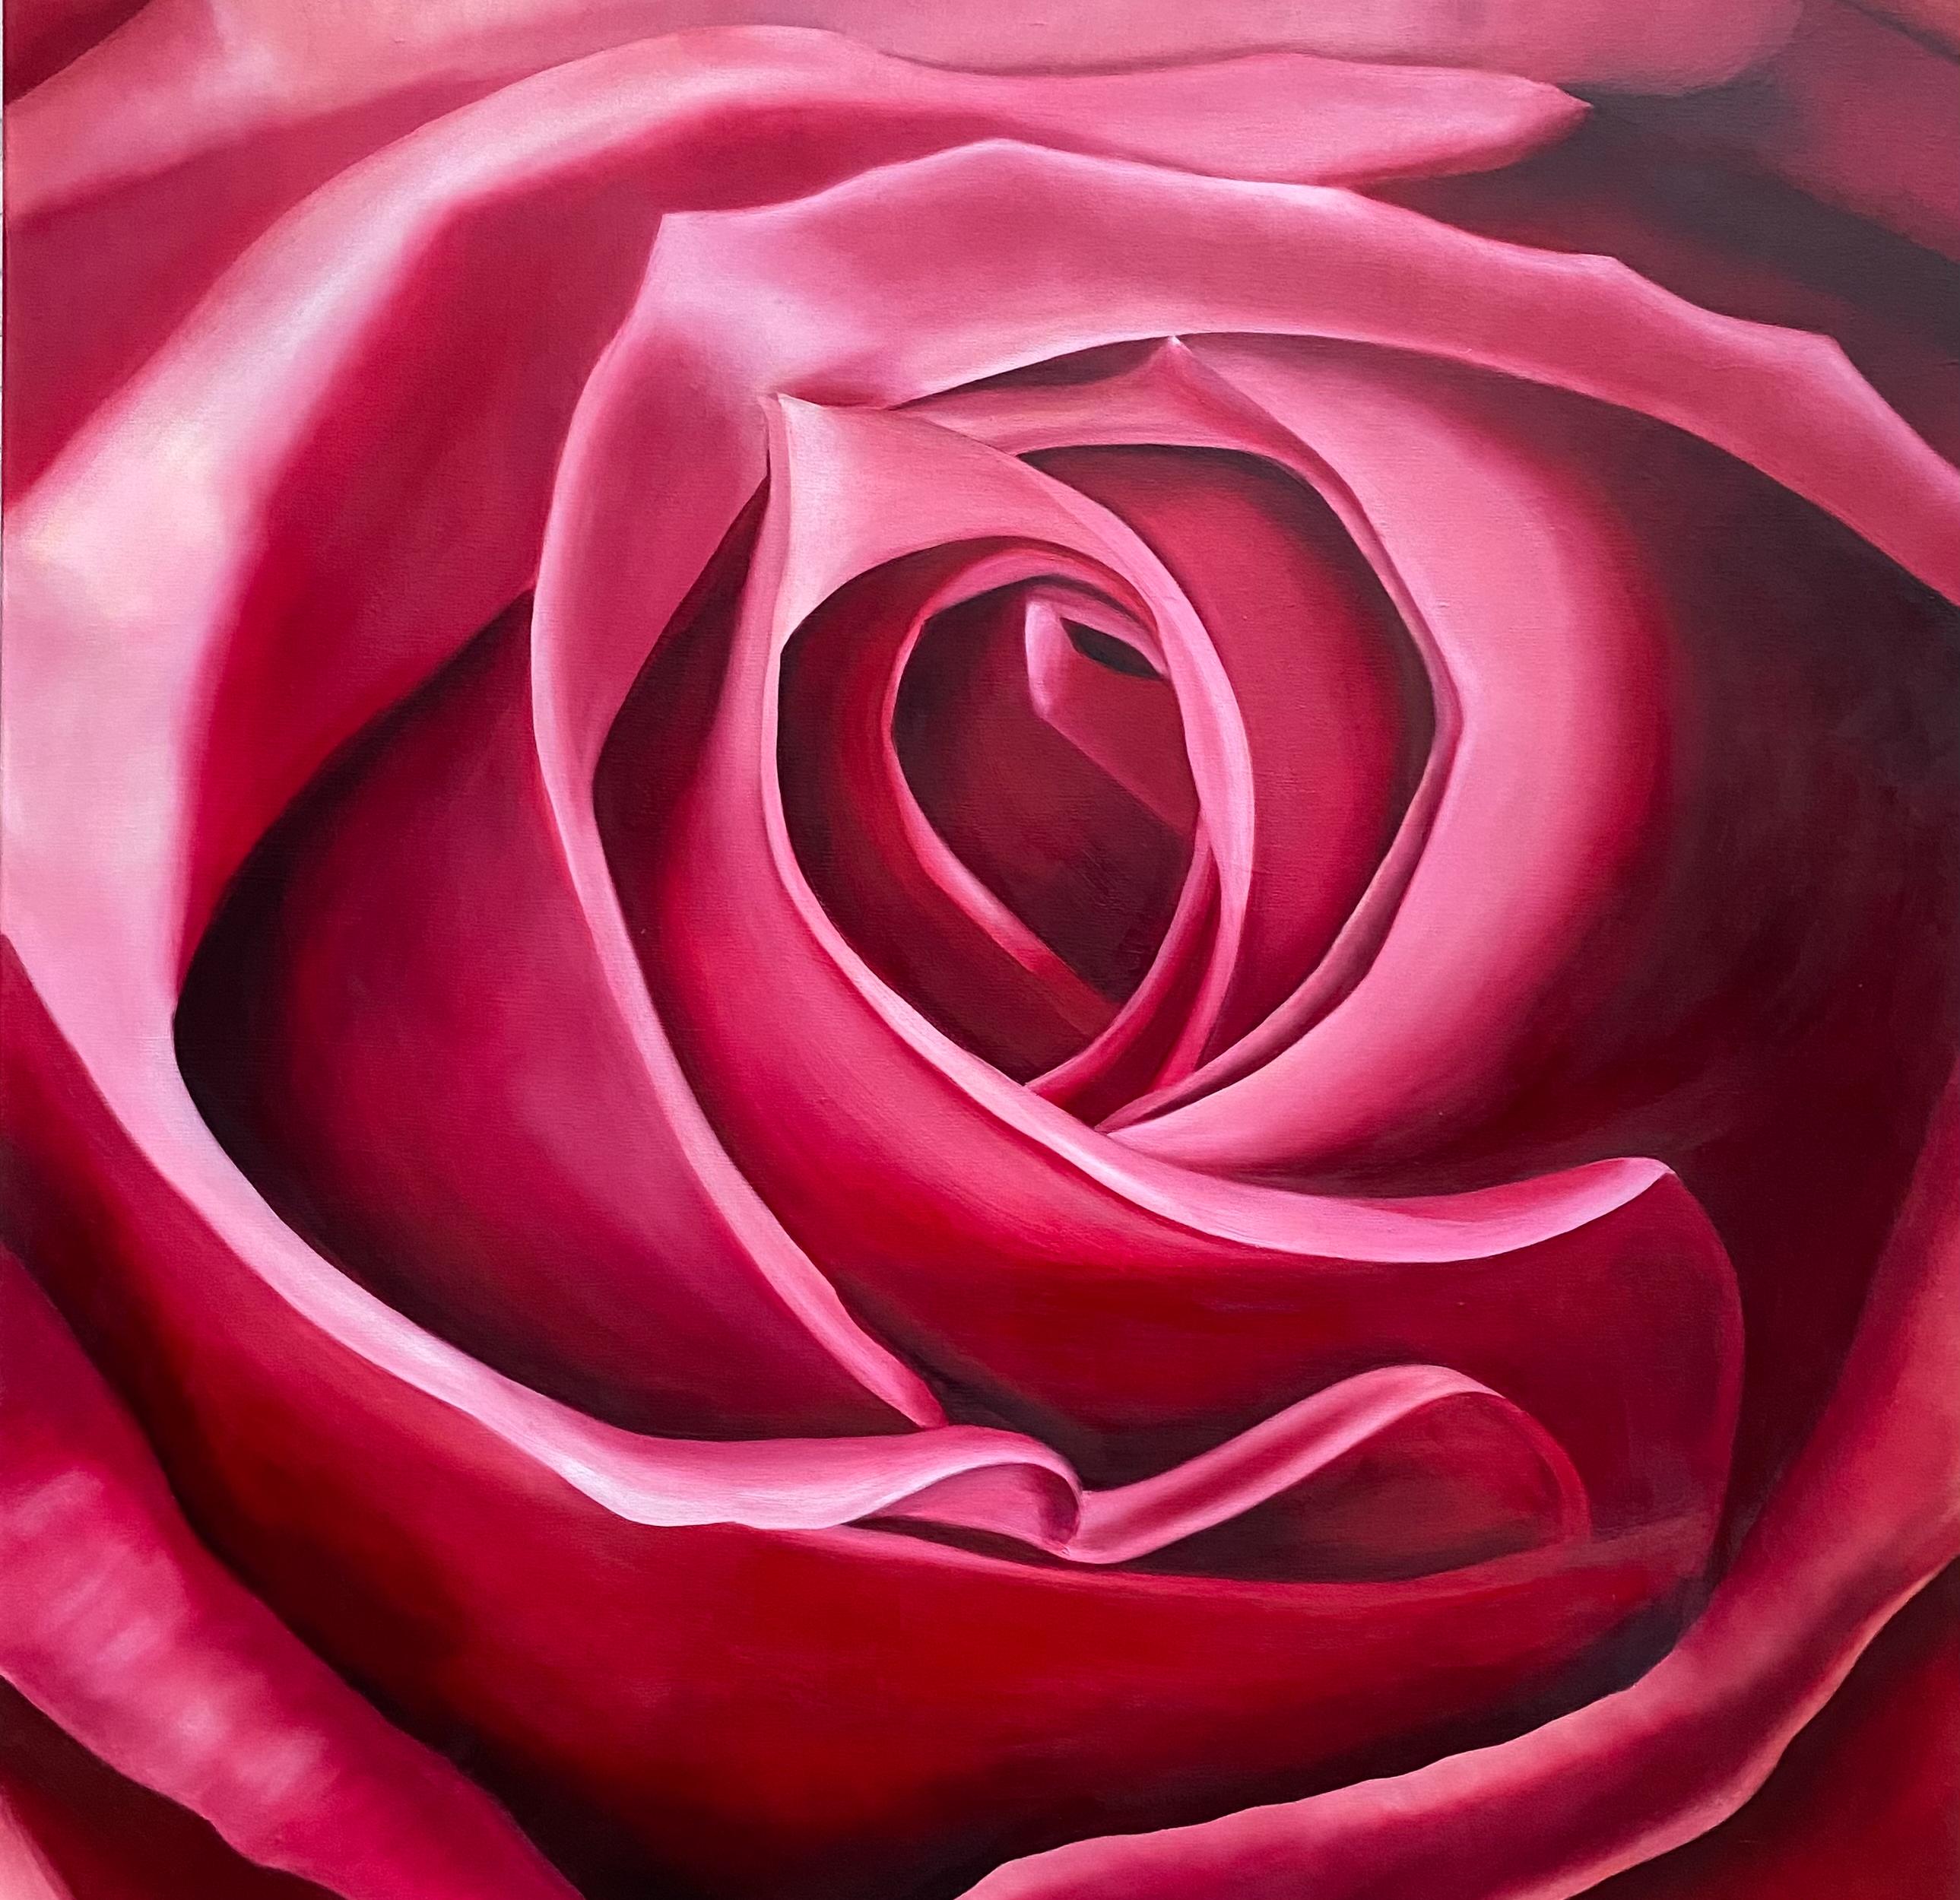 Rose  Realism Oil on Canvas    Gallery Wrapped Floral 54 x 44  Valentines - American Realist Painting by Susan Meeks